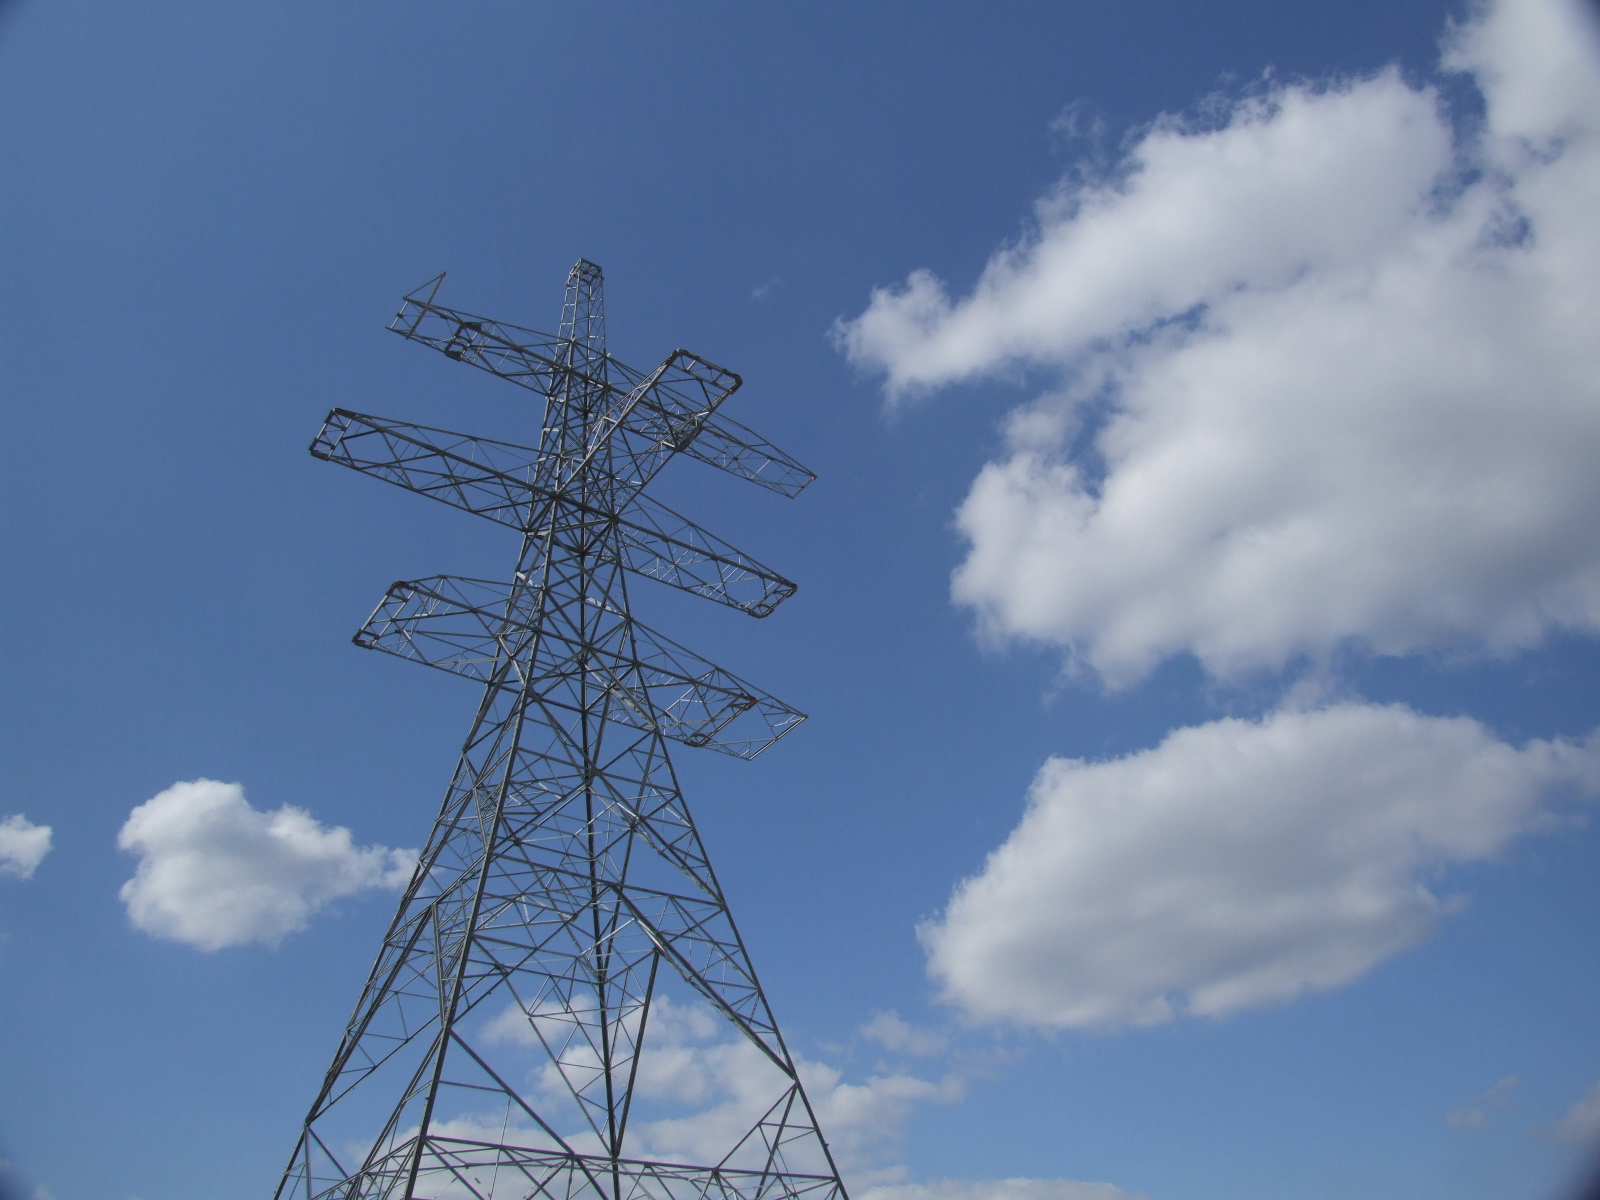 A high angle view of an electricity pylon against a blue and cloudy sky 